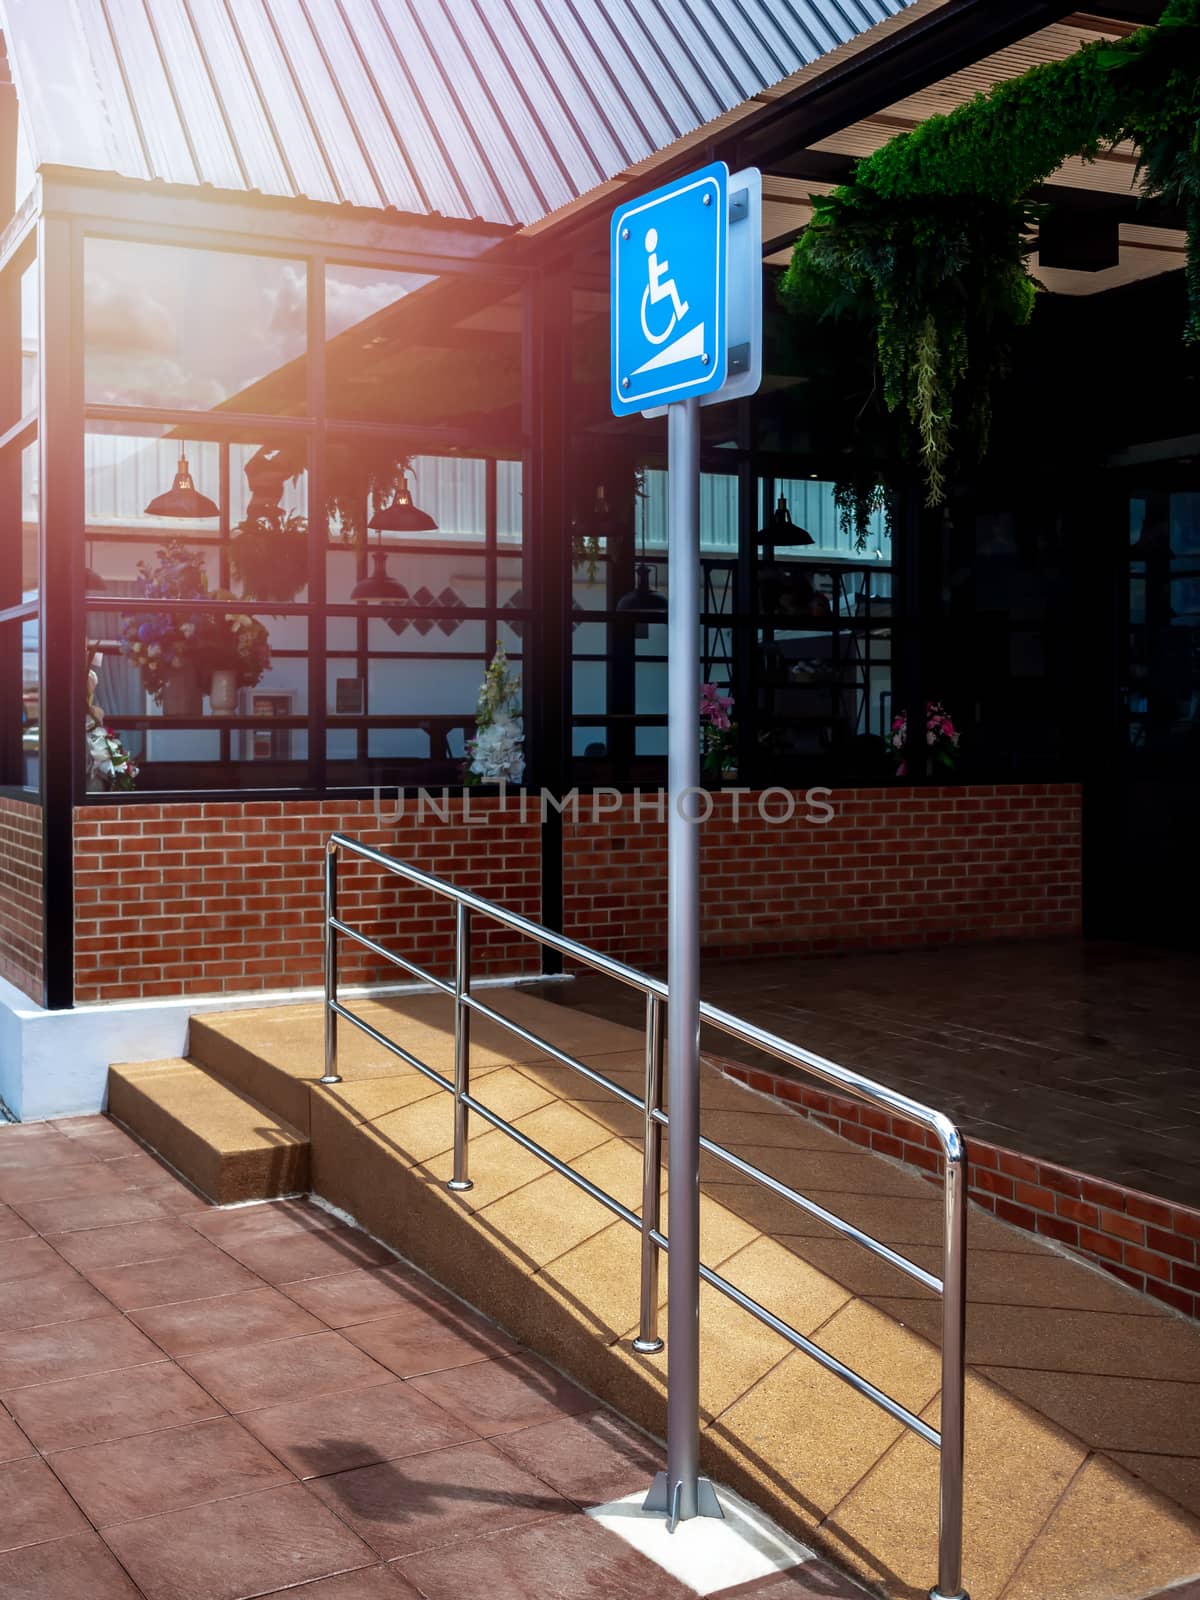 Disabled way sign in front of building, vertical style. Wheelchair ramp way with disabled sign for support wheelchair disabled people.